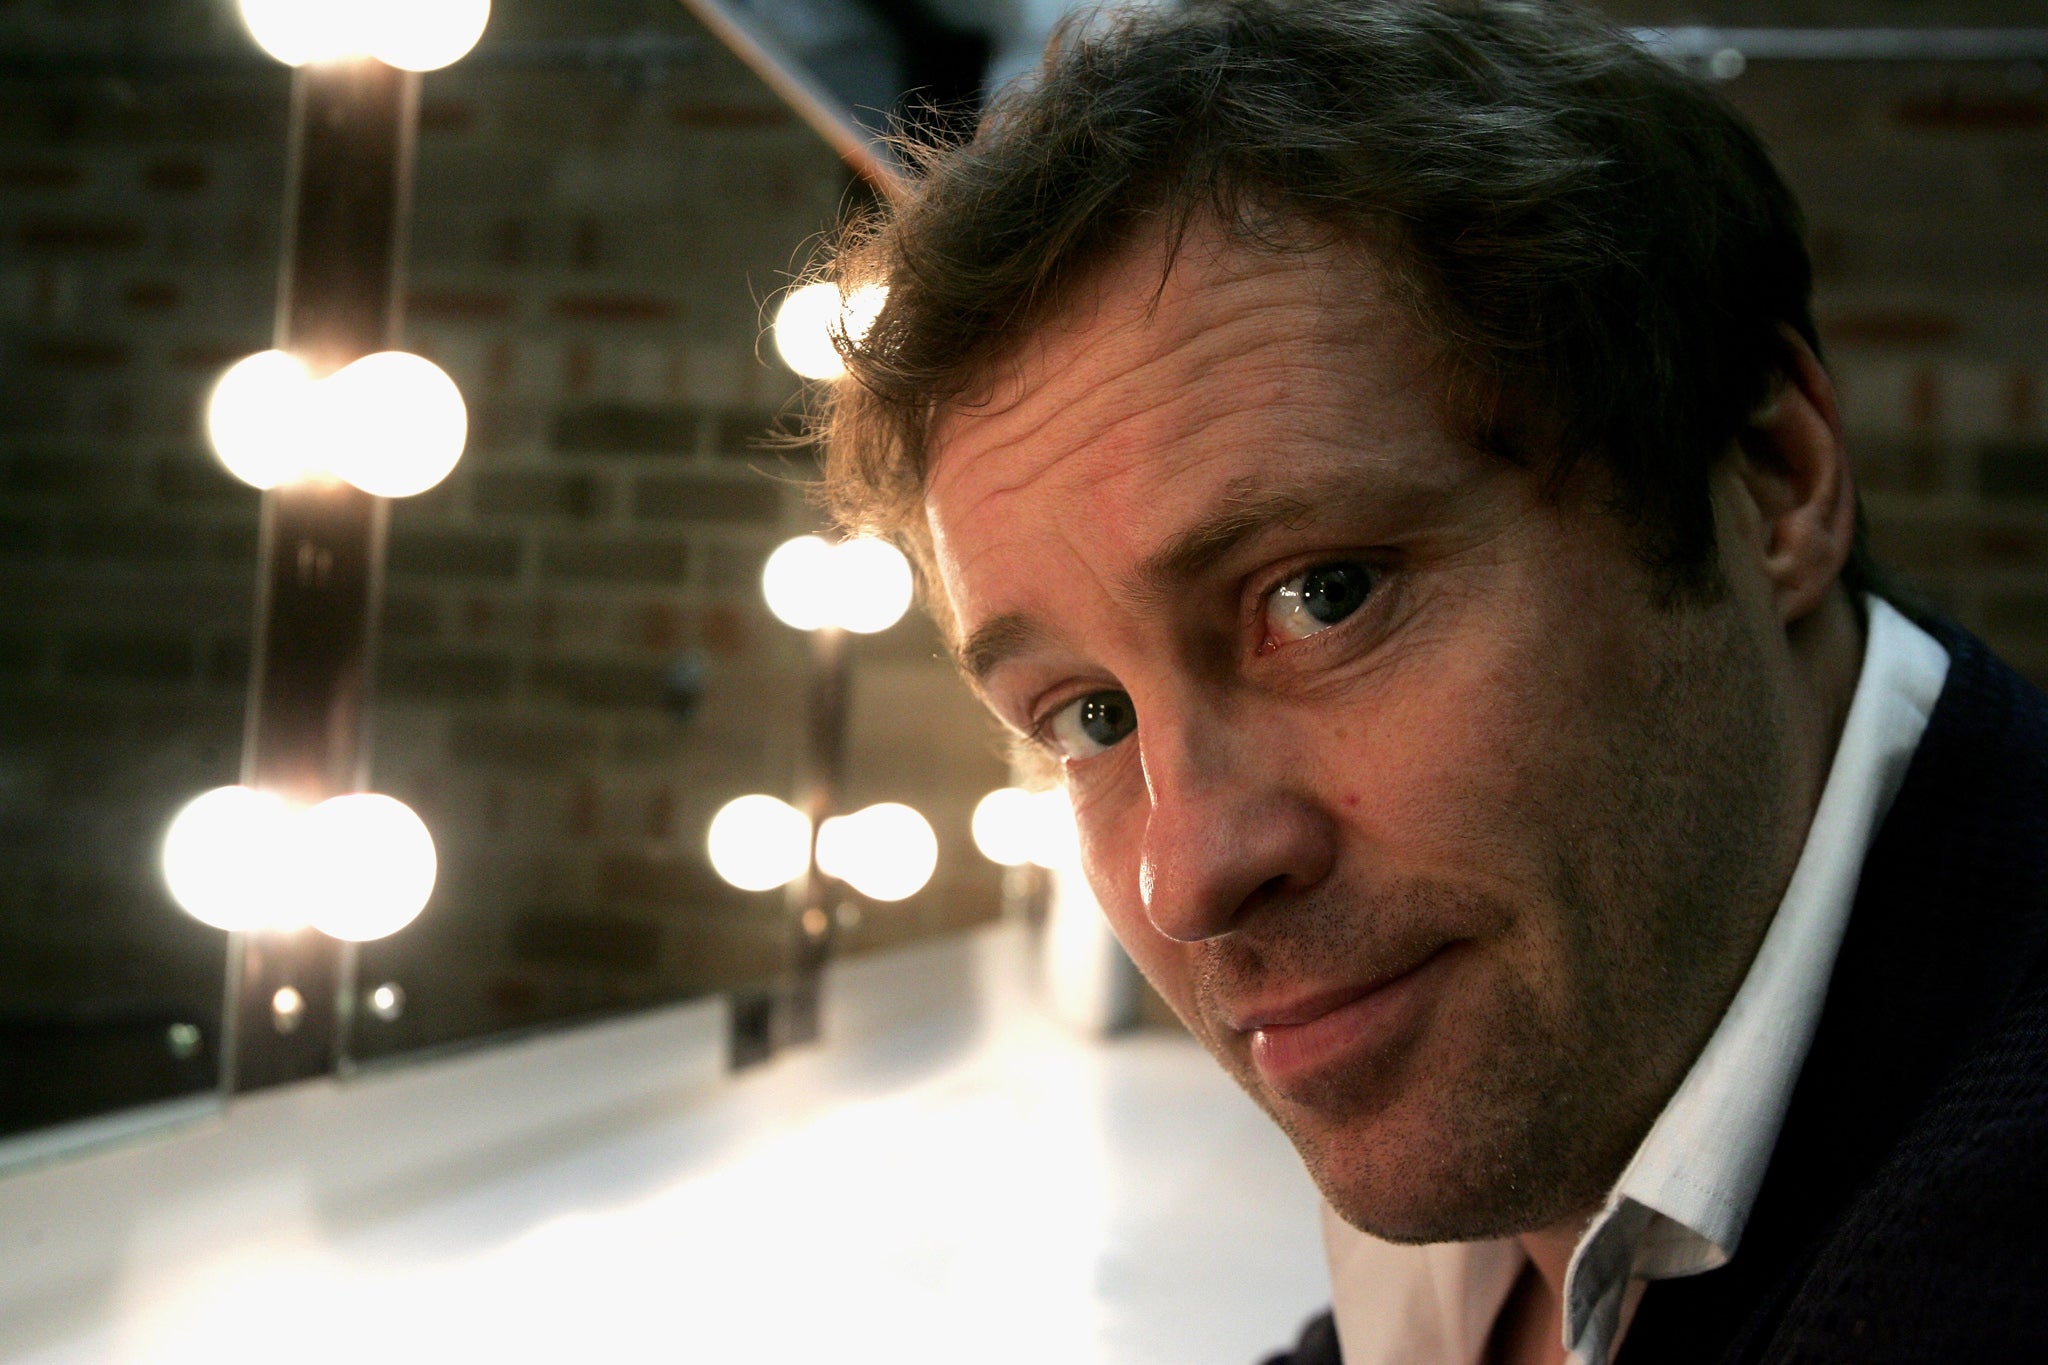 Father Ted actor Ardal O'Hanlon has been cast in Channel 4 drama London Irish